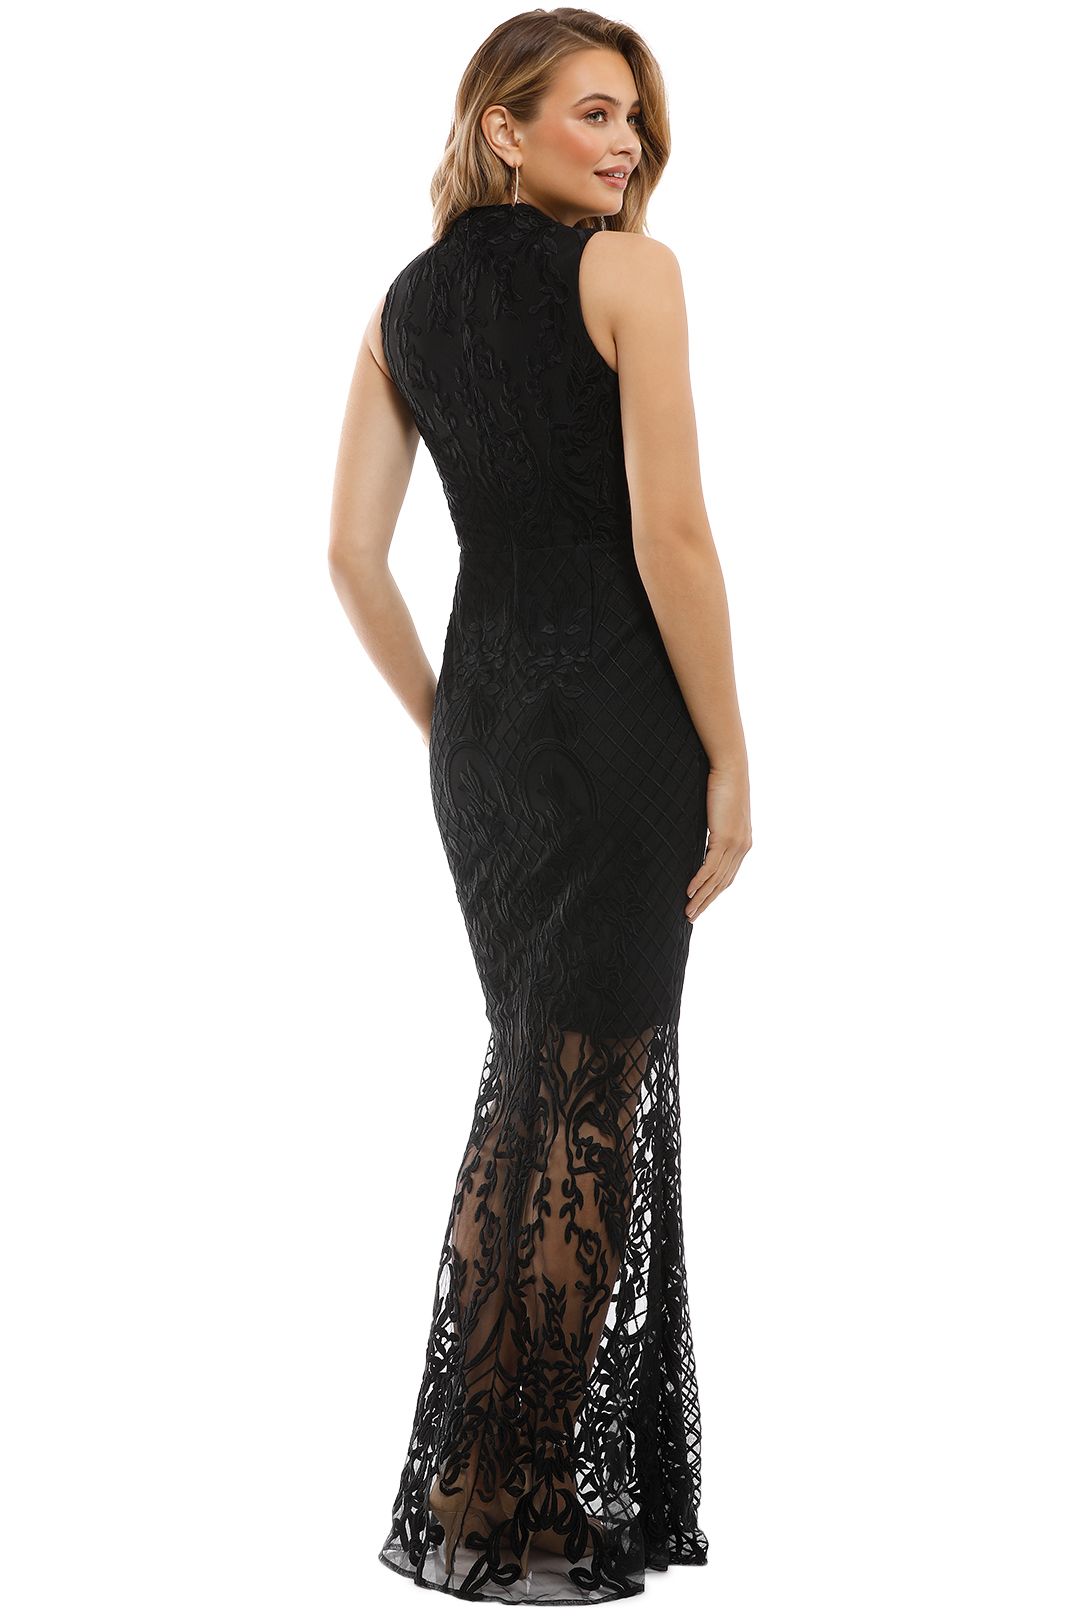 Grace and Hart - Ignite Passion Gown - Black - Back